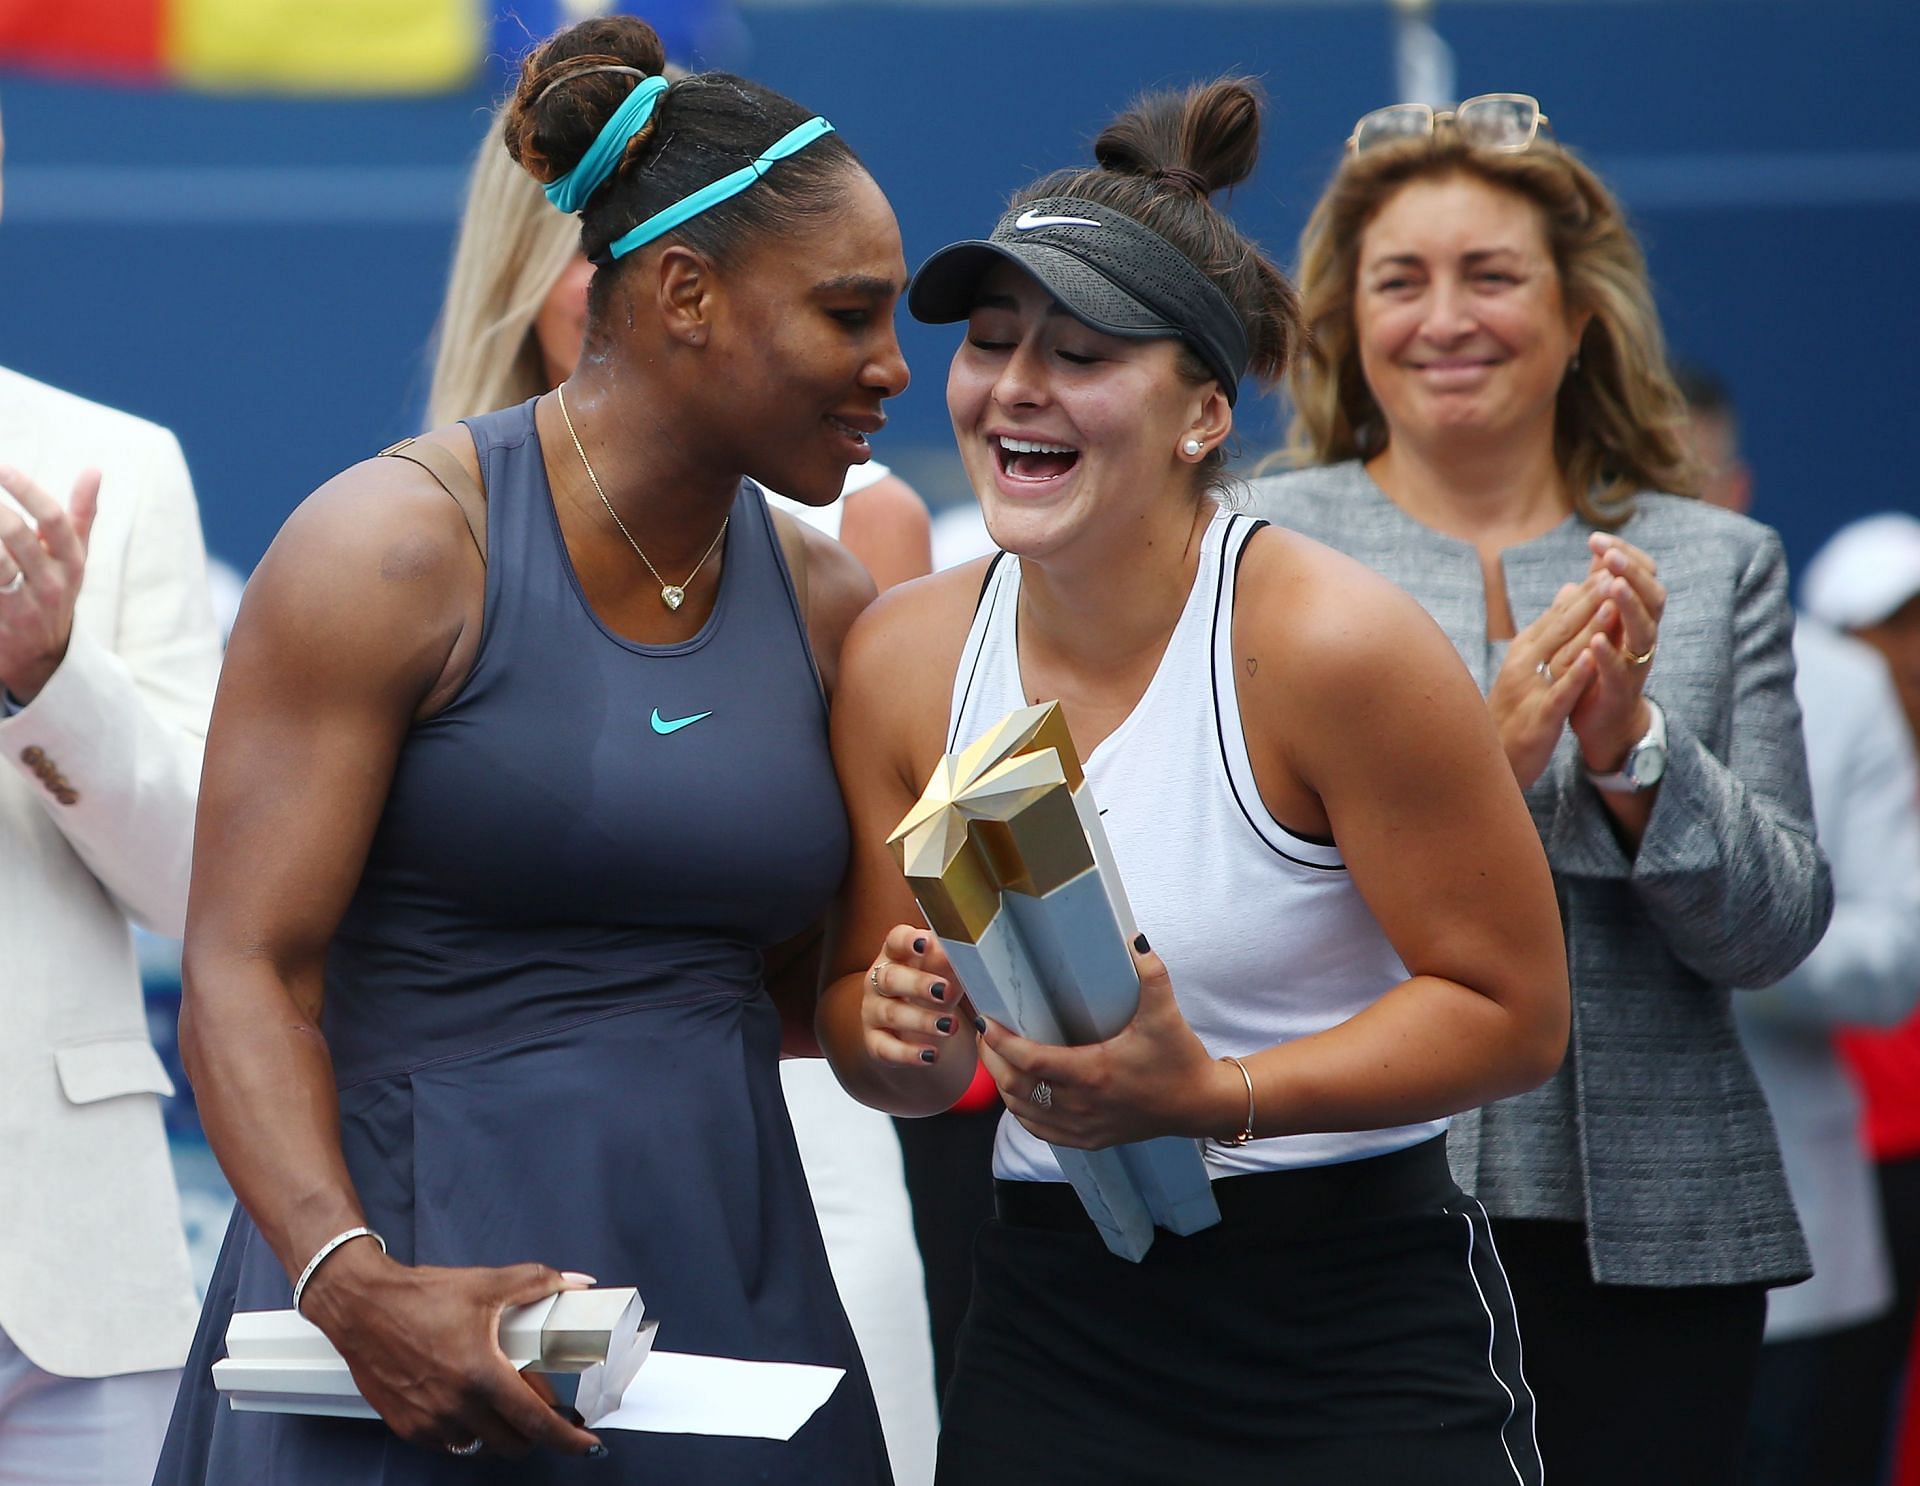 Canadian Open 2019 champion Bianca Andreescu and runner-up Serena Williams share a light moment during the trophy ceremony